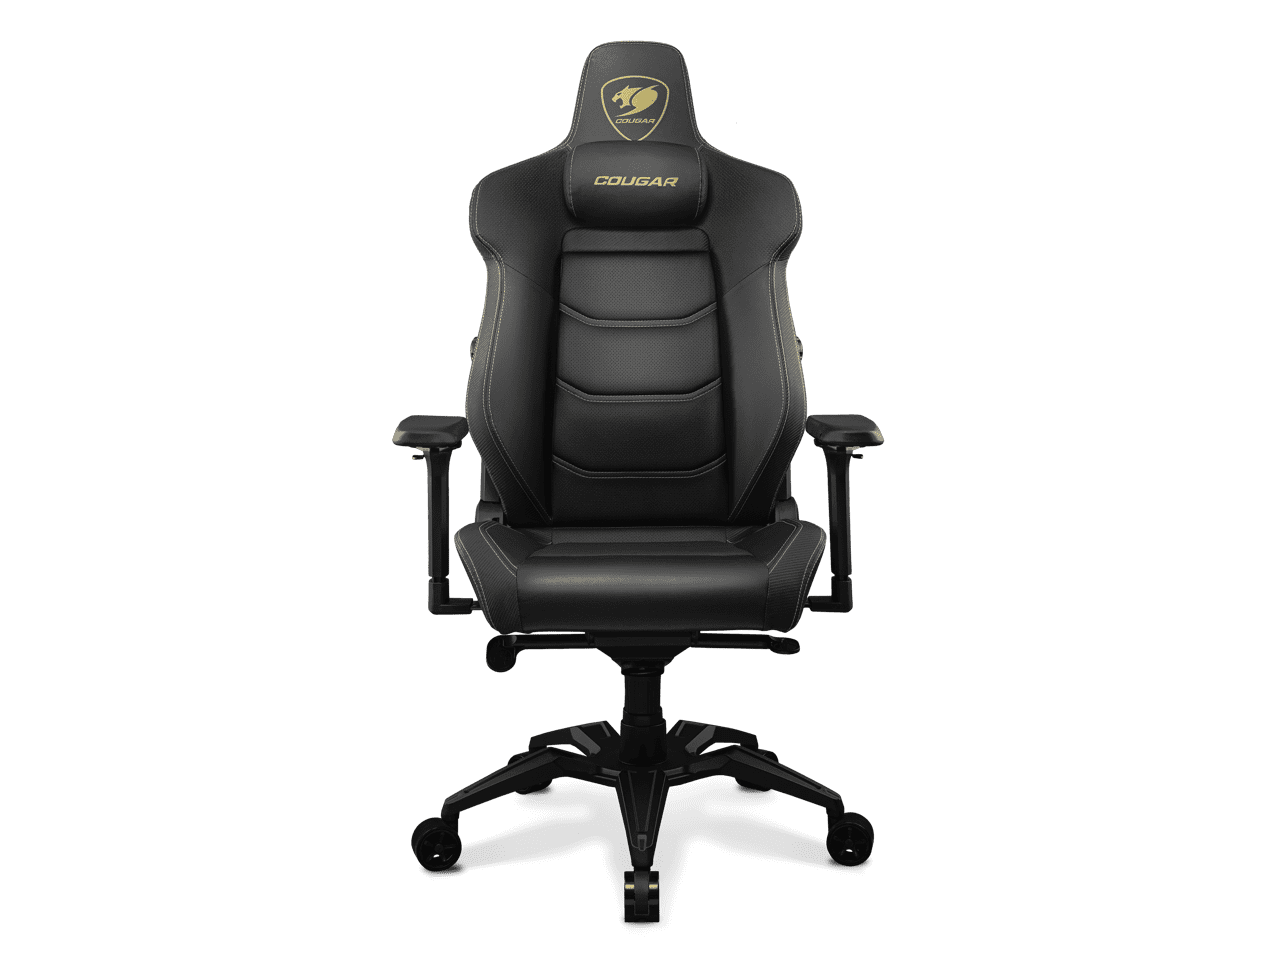 Gaming chair Cougar Armor One X Green computer, up to 120 kg, PU leather,  2D, 180° folding back, Ergonomic, comfortable work on computer, healthy  back, correct posture, massage chair, office chair - AliExpress